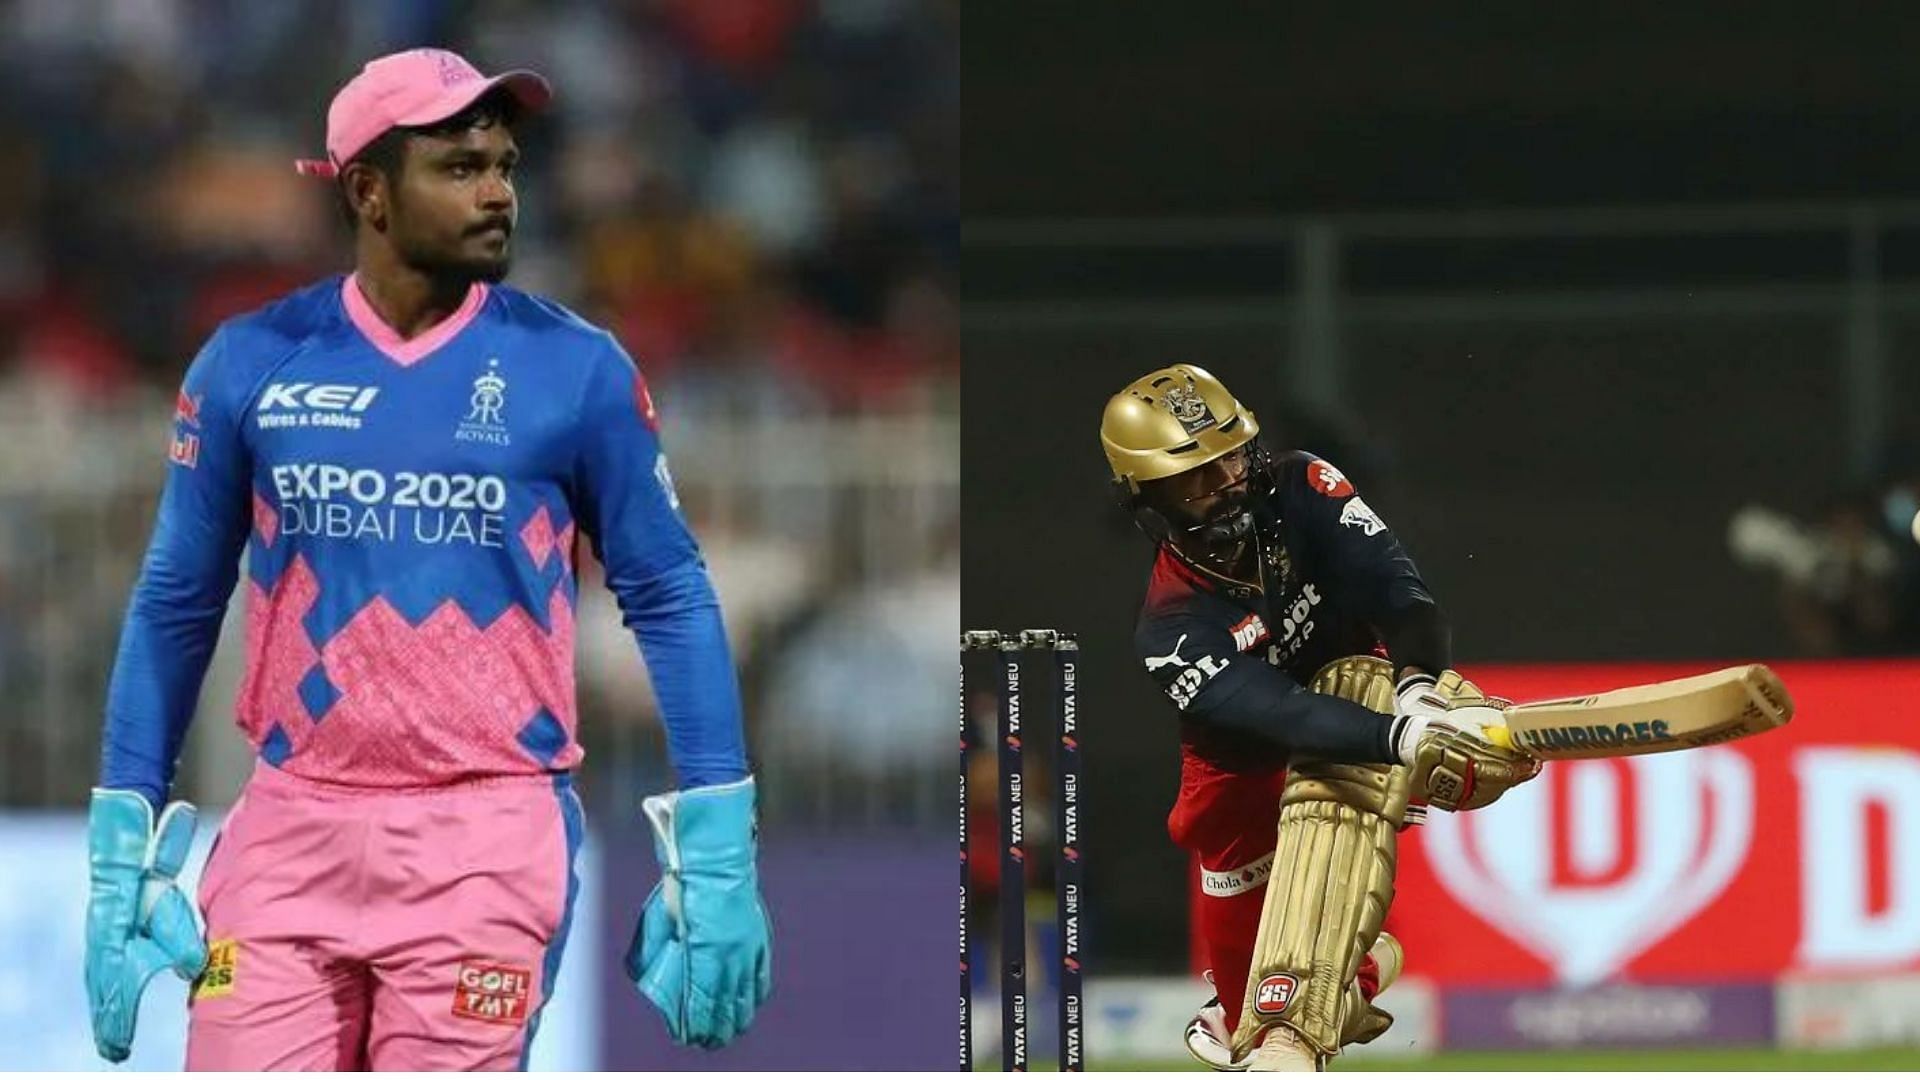 Sanju Samson (L) made some questionable bowling and field changes against RCB. (P.C.:iplt20.com)